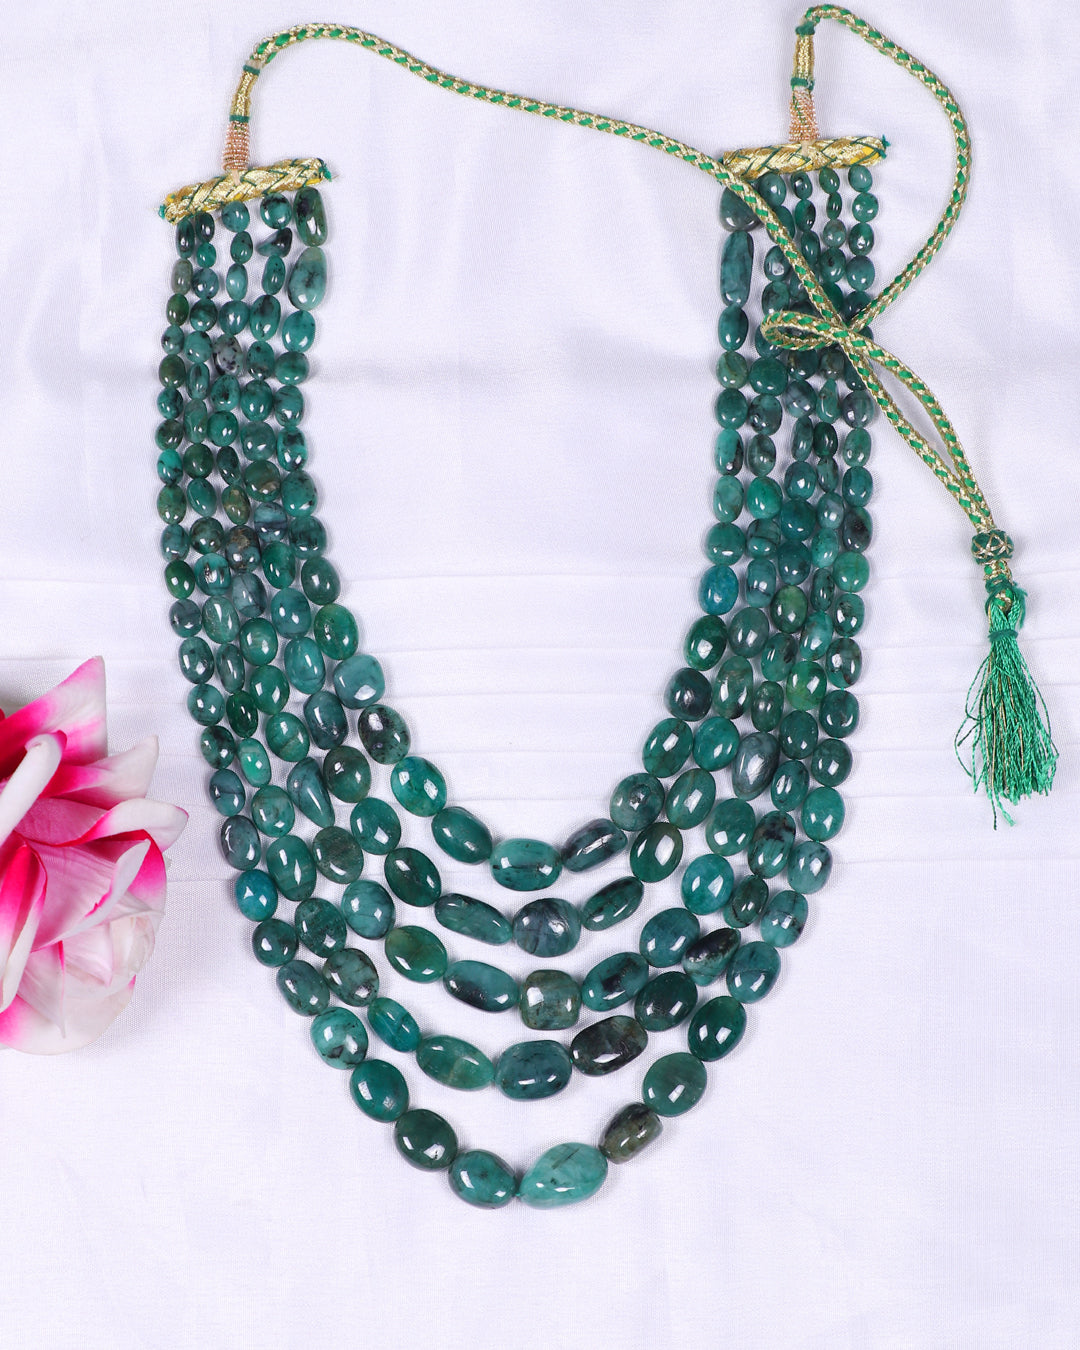 Natural Emerald Gemstone Oval Beads Necklace Jewelry